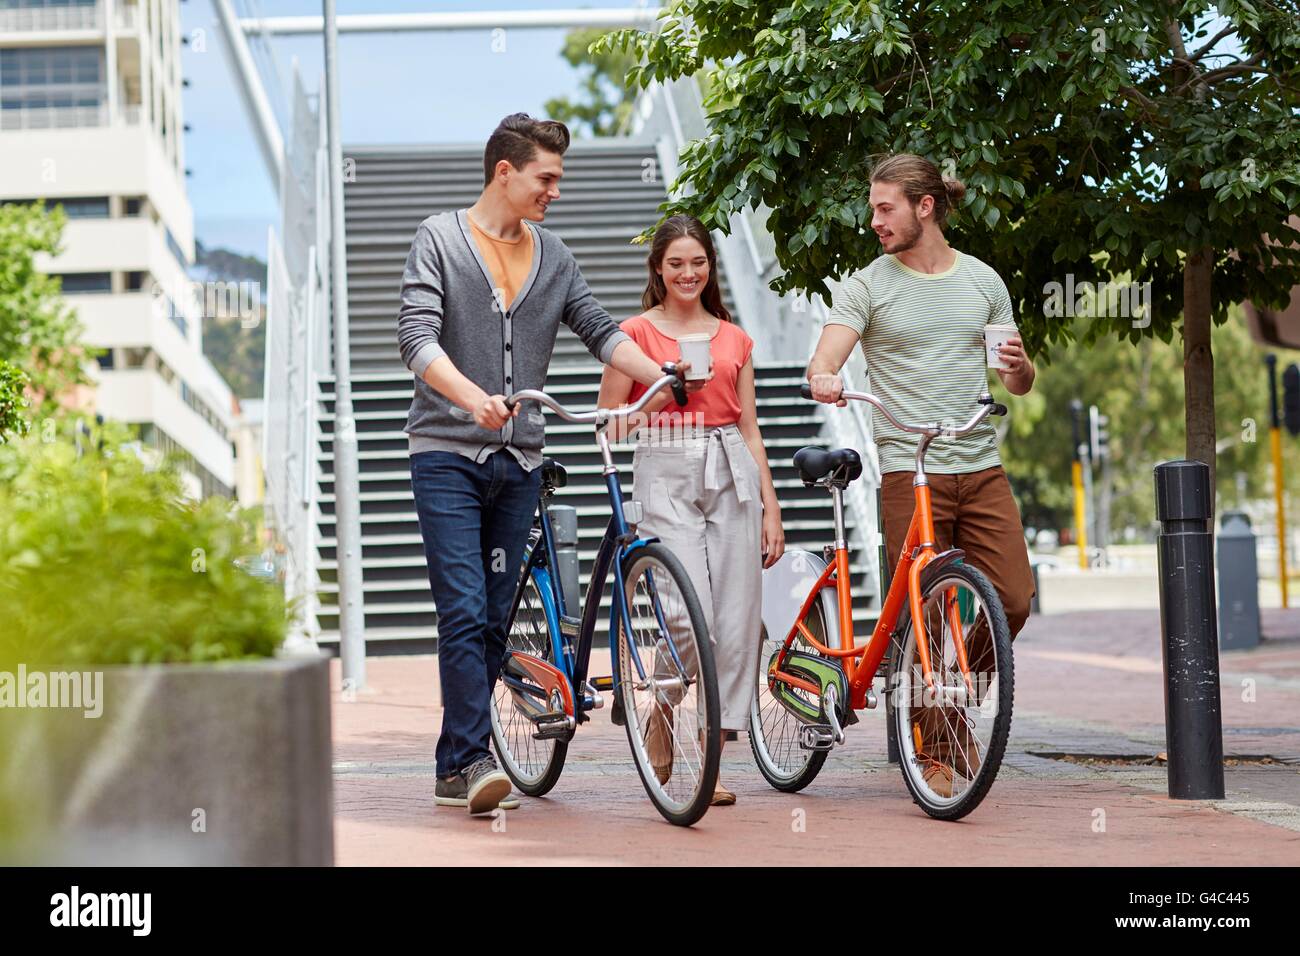 MODEL RELEASED. Young couple walking with bikes. Stock Photo